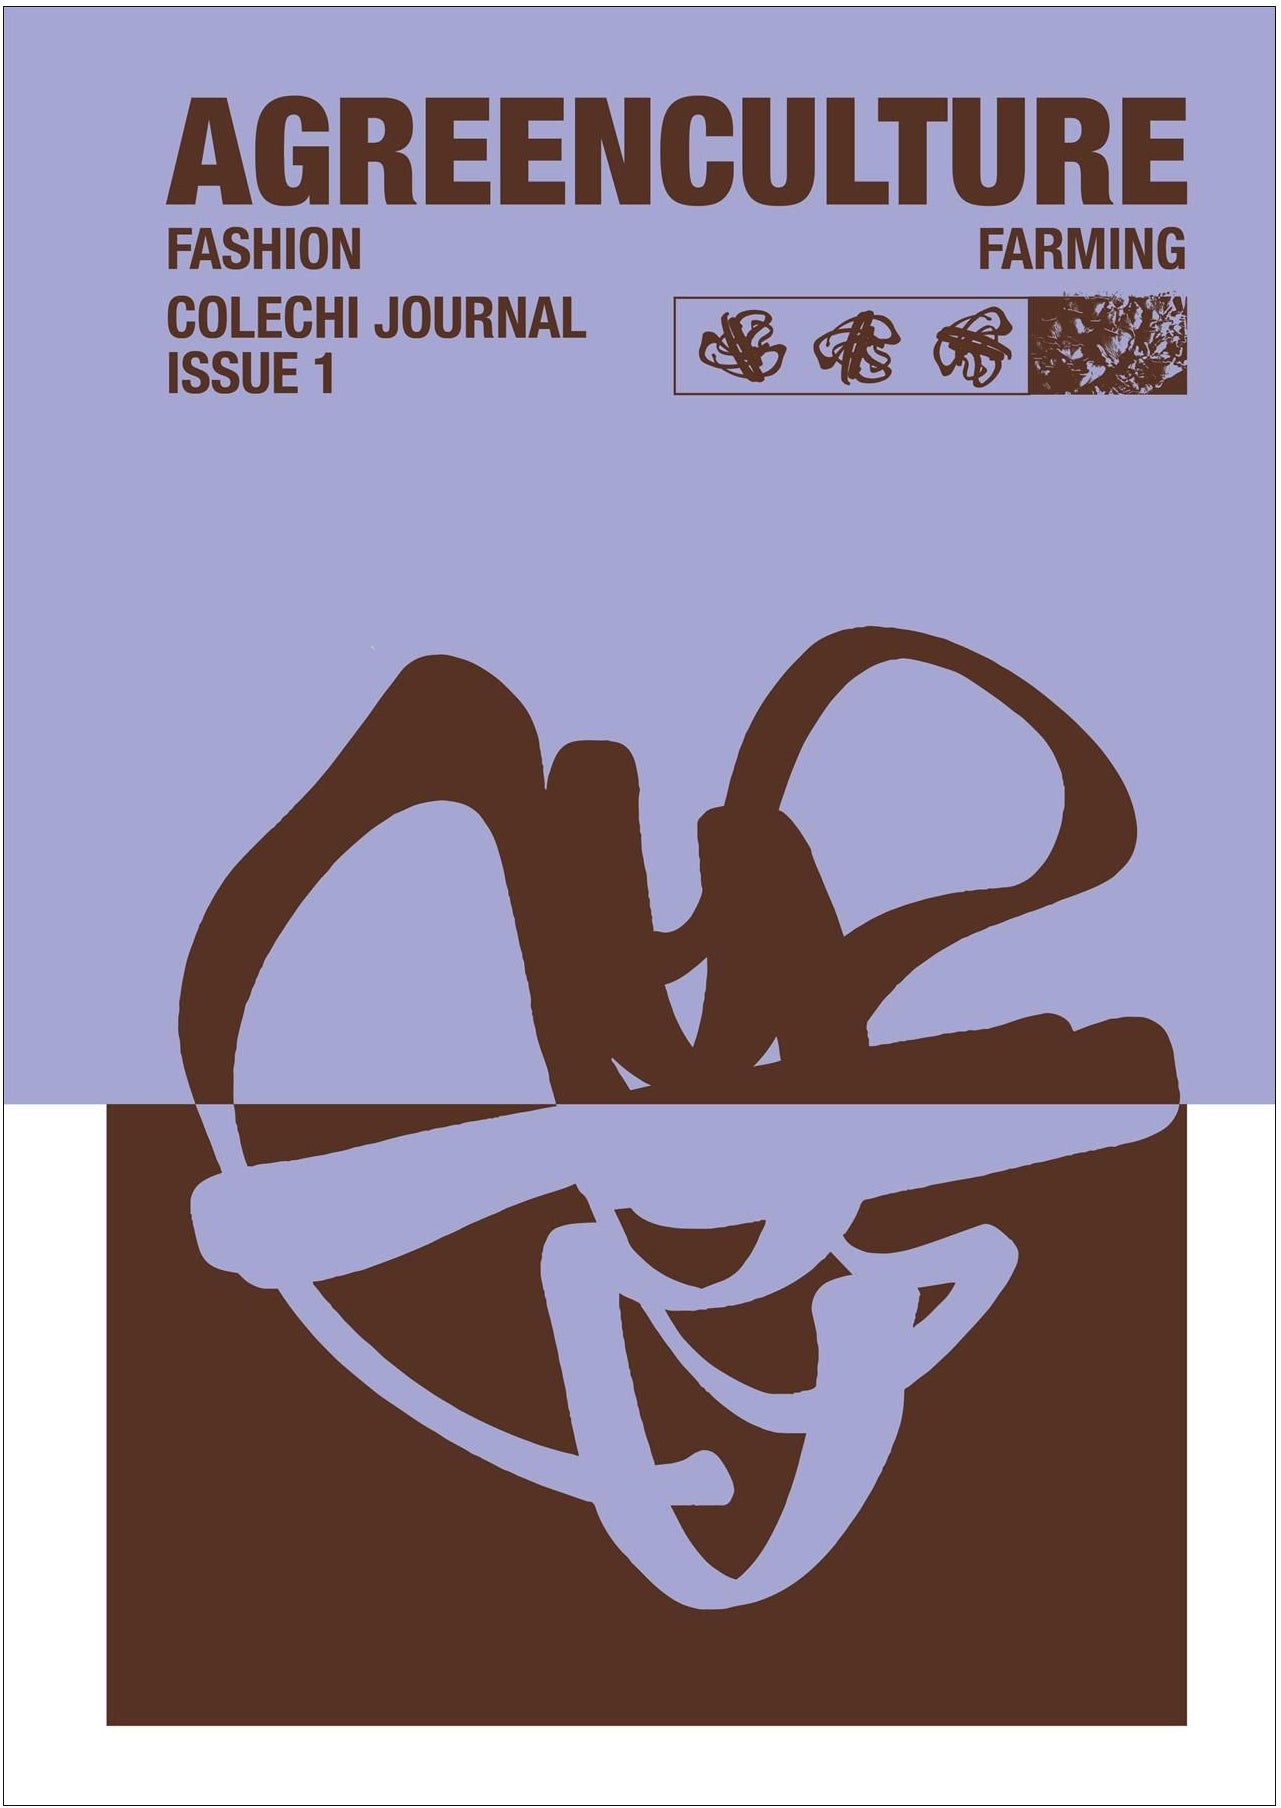 Colechi Journal #1, AGREENCULTURE